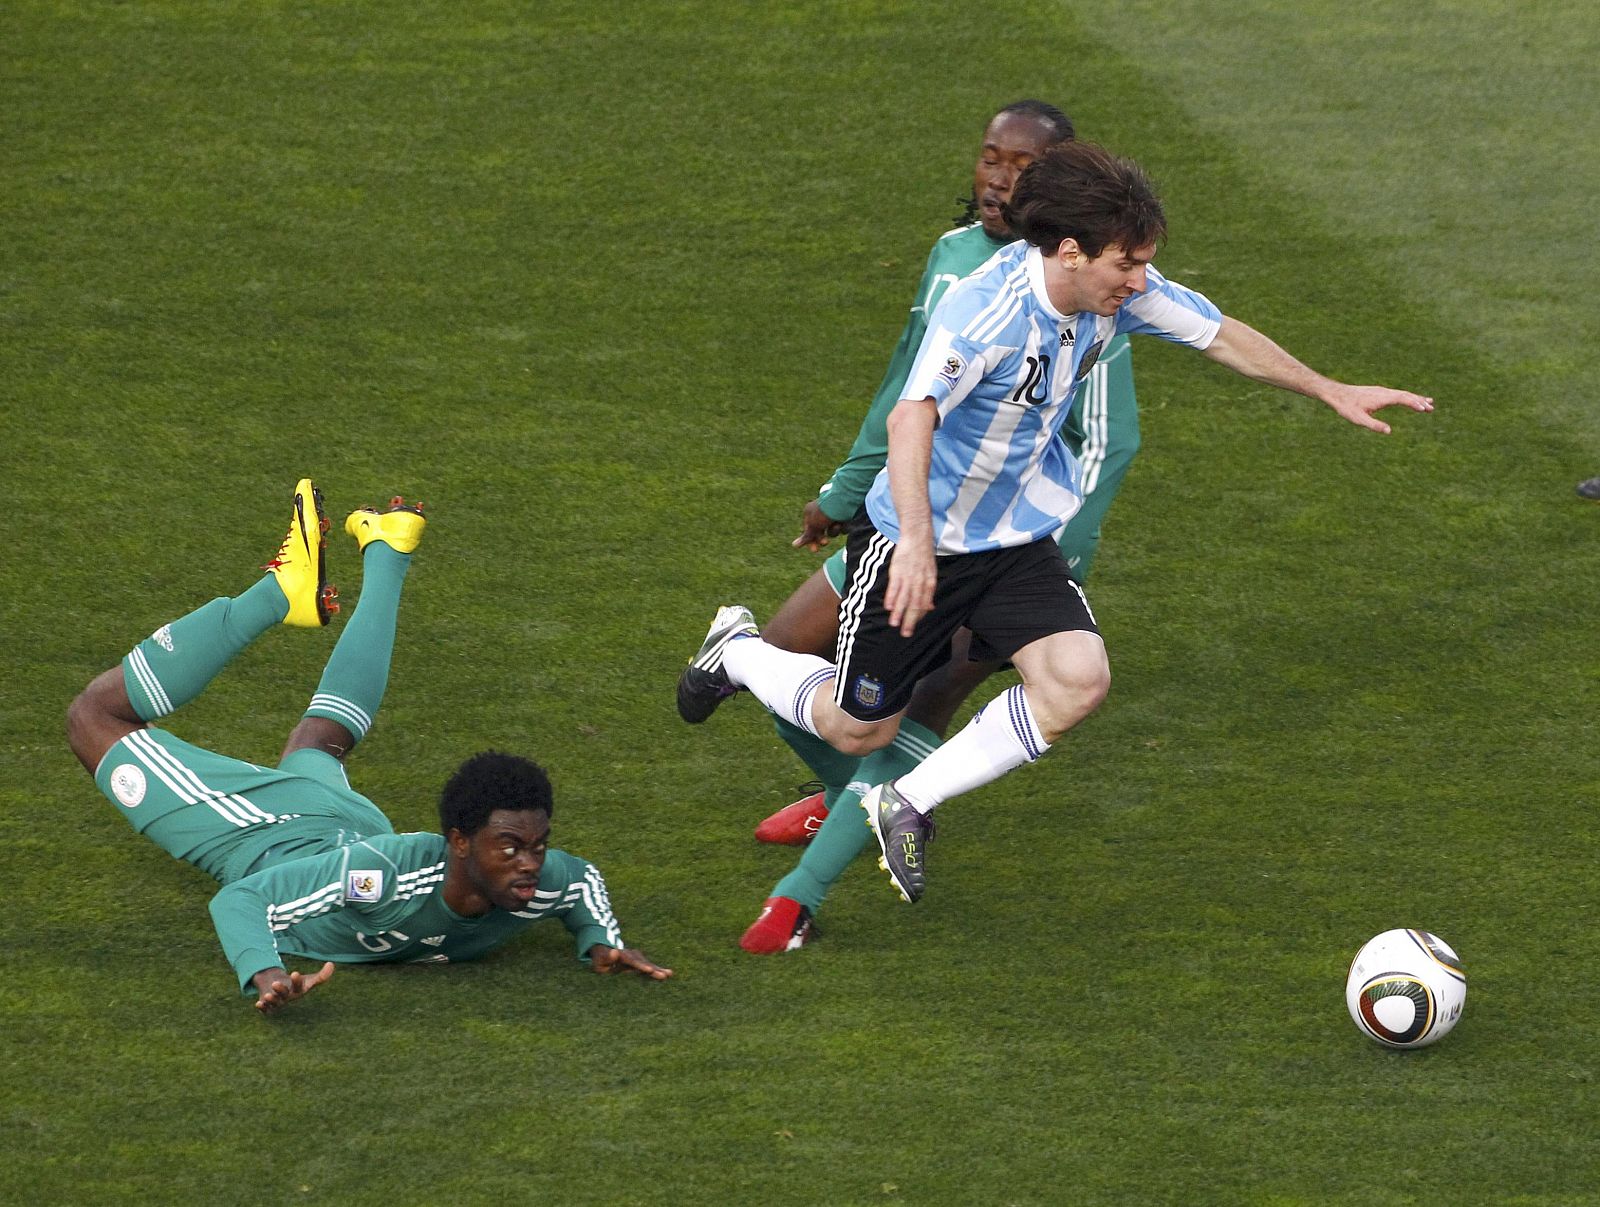 Argentina's Lionel Messi is fouled by Nigeria's Haruna Lukman during a 2010 World Cup Group B soccer match at Ellis Park stadium